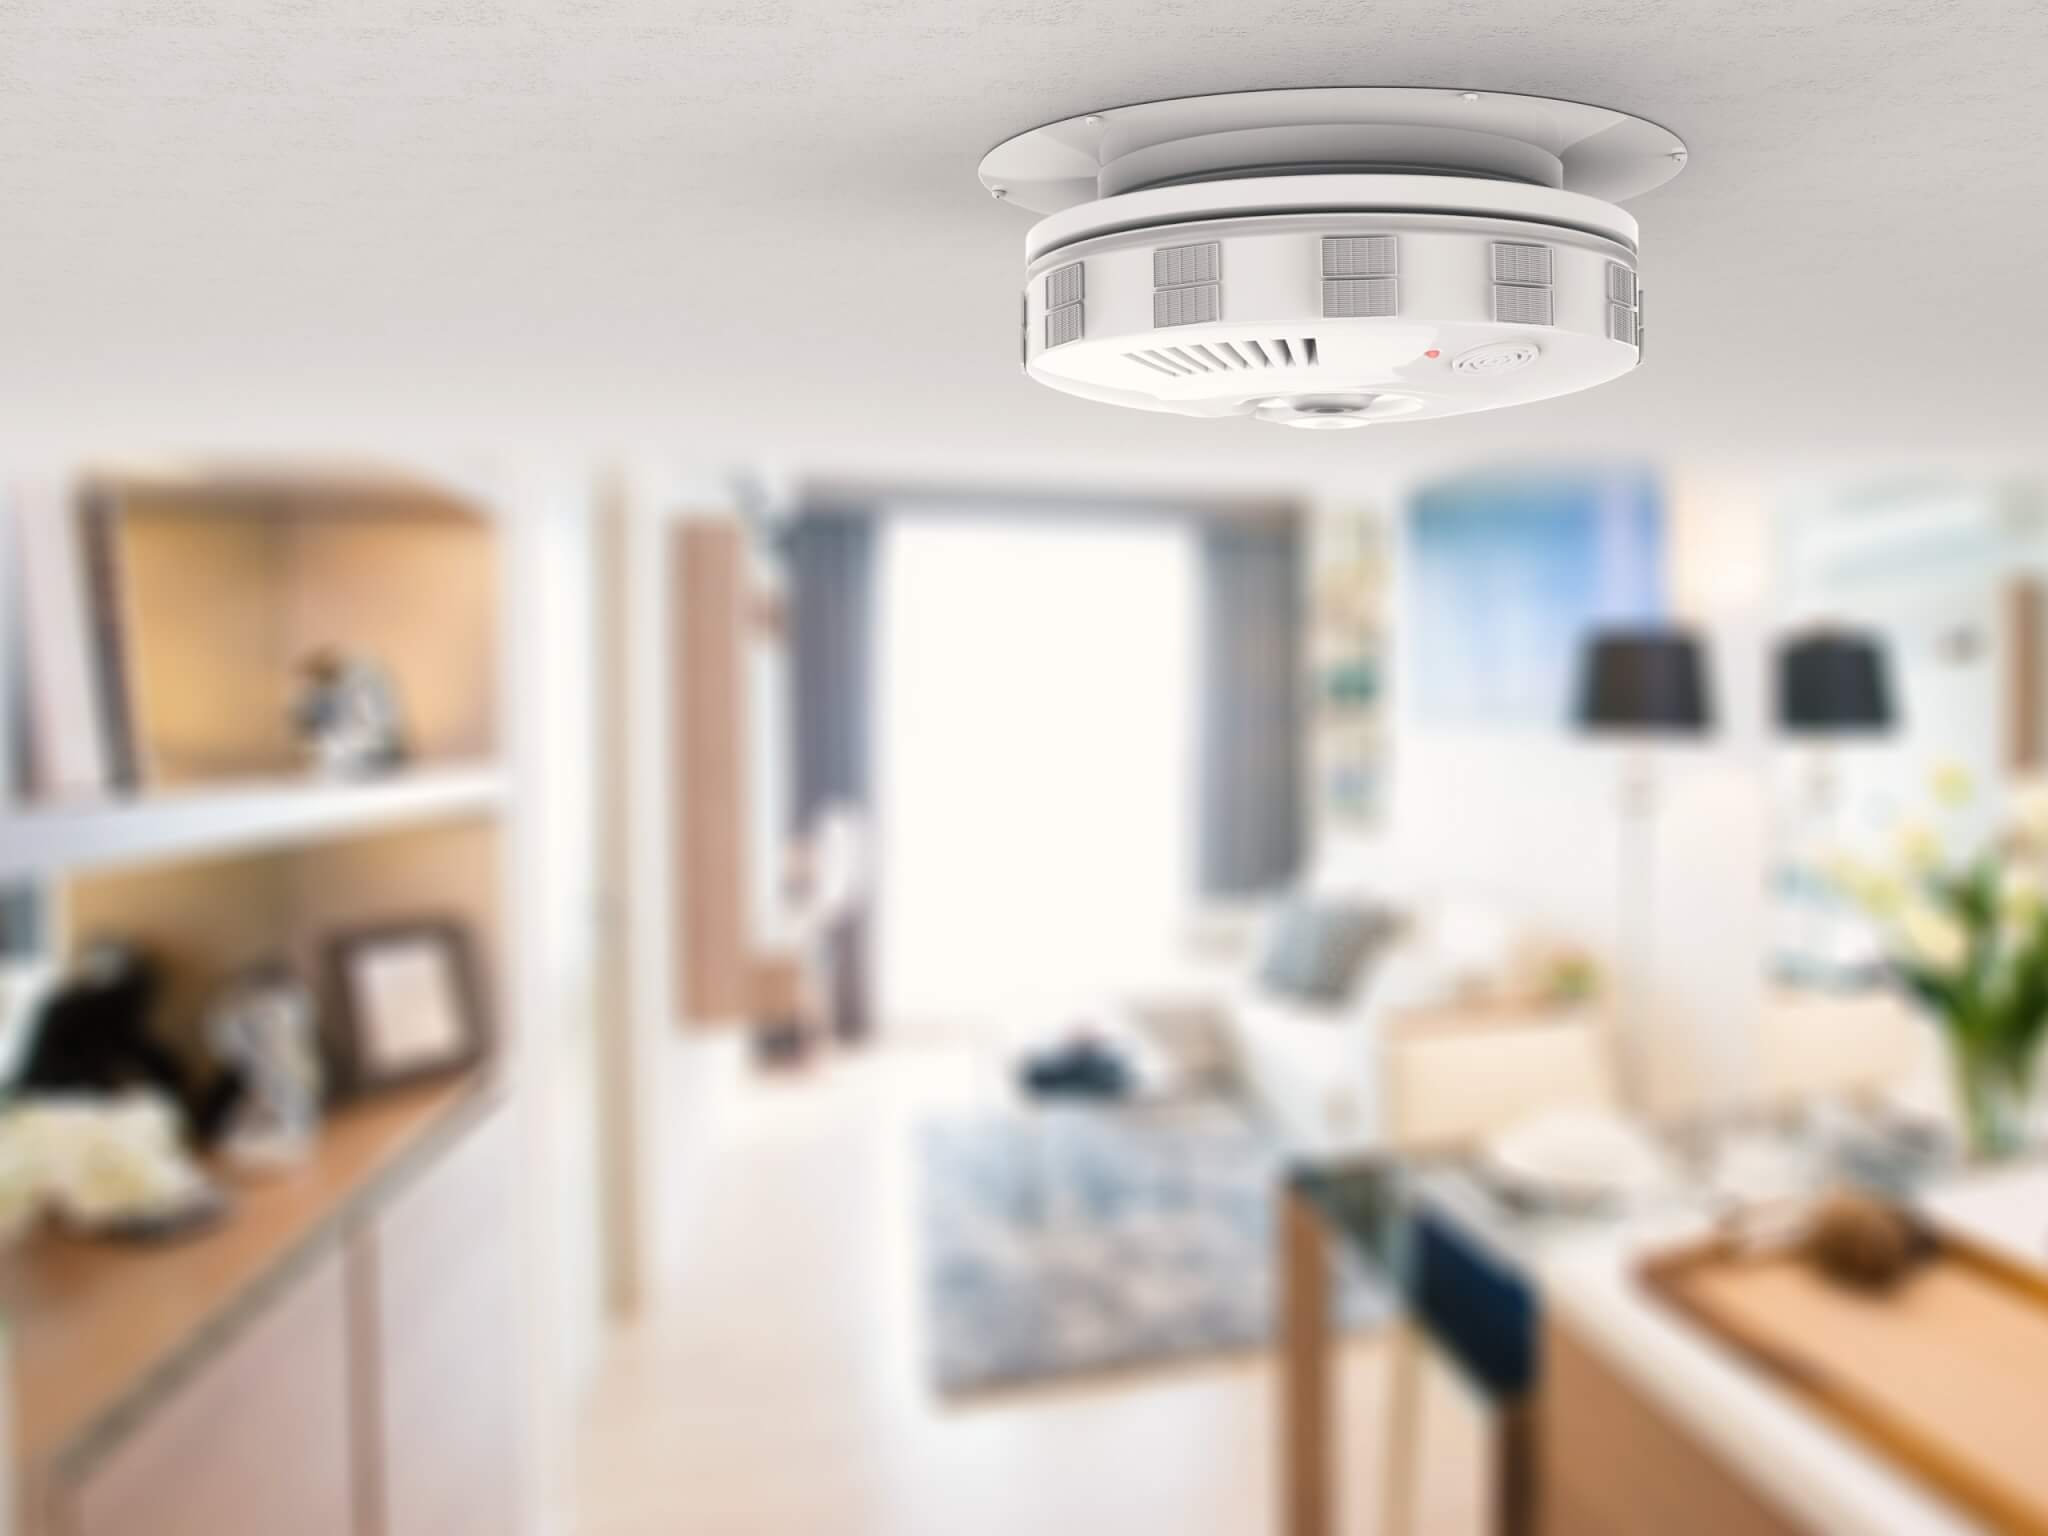 Regularly check smoke detectors in your vacation rental properties